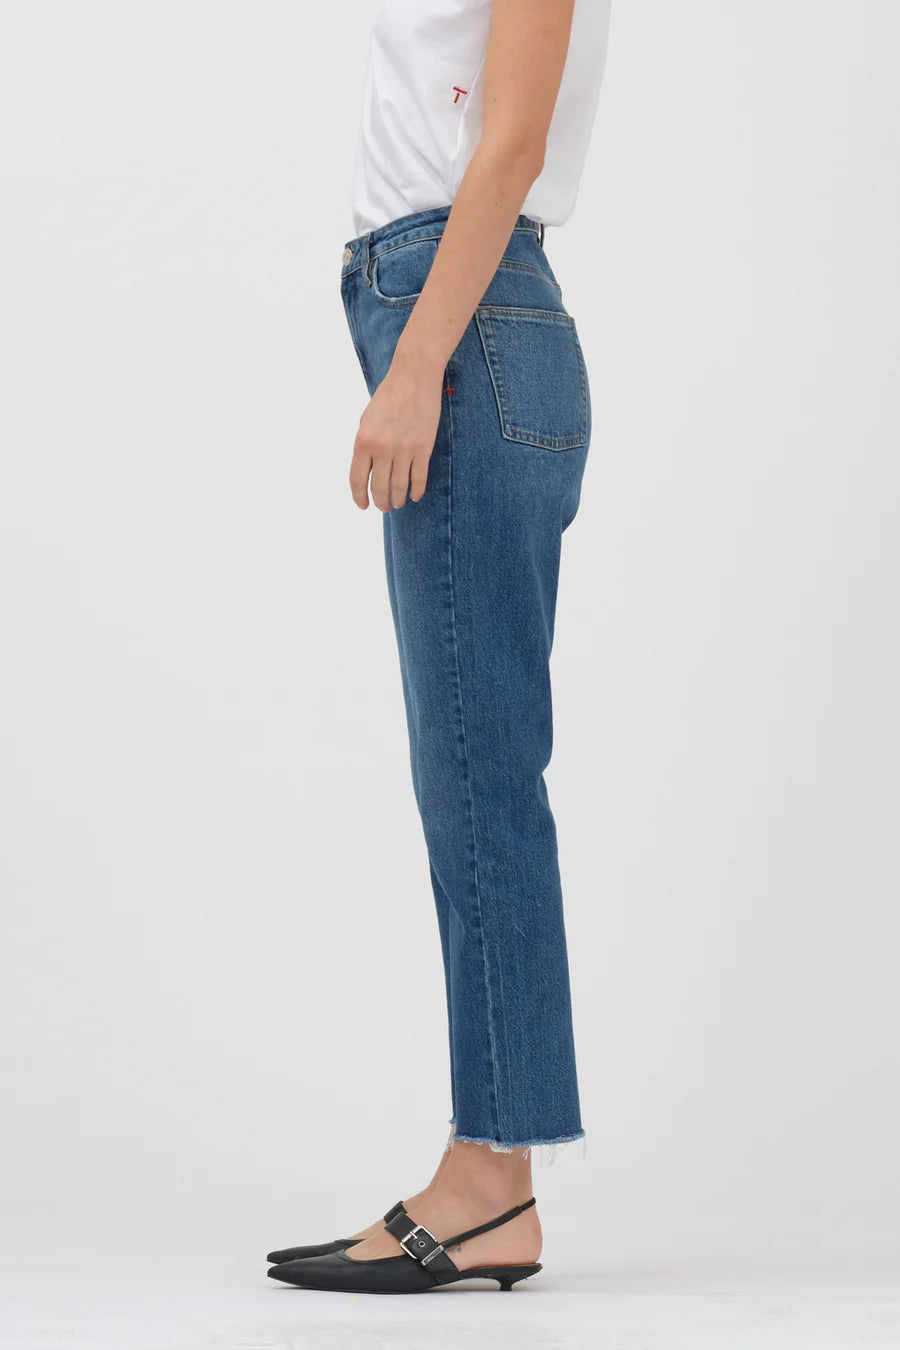 The back view of a woman wearing Tomorrow Denim's Anne Slim Jeans - Boston, a high waist white t-shirt made from organic cotton.